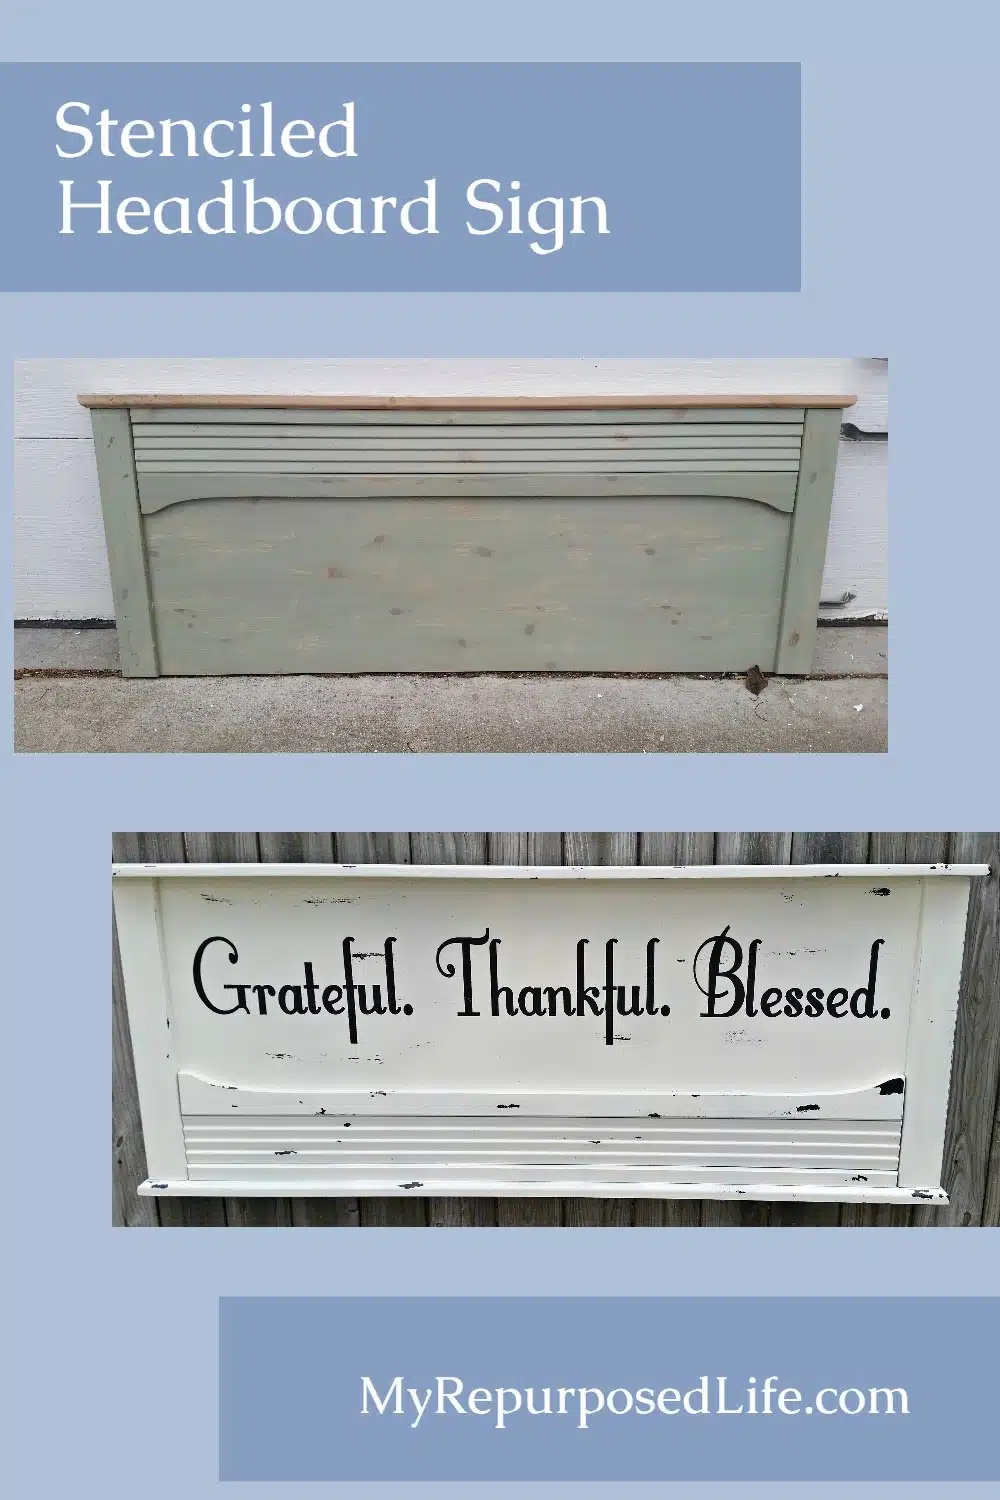 A stenciled headboard sign. Grateful Thankful Blessed. A repurposed headboard gets painted, and stenciled with vaseline distressing to make it look old. #MyRepurposedLife #repurposed #headboard #sign #grateful #thankful #blessed via @repurposedlife